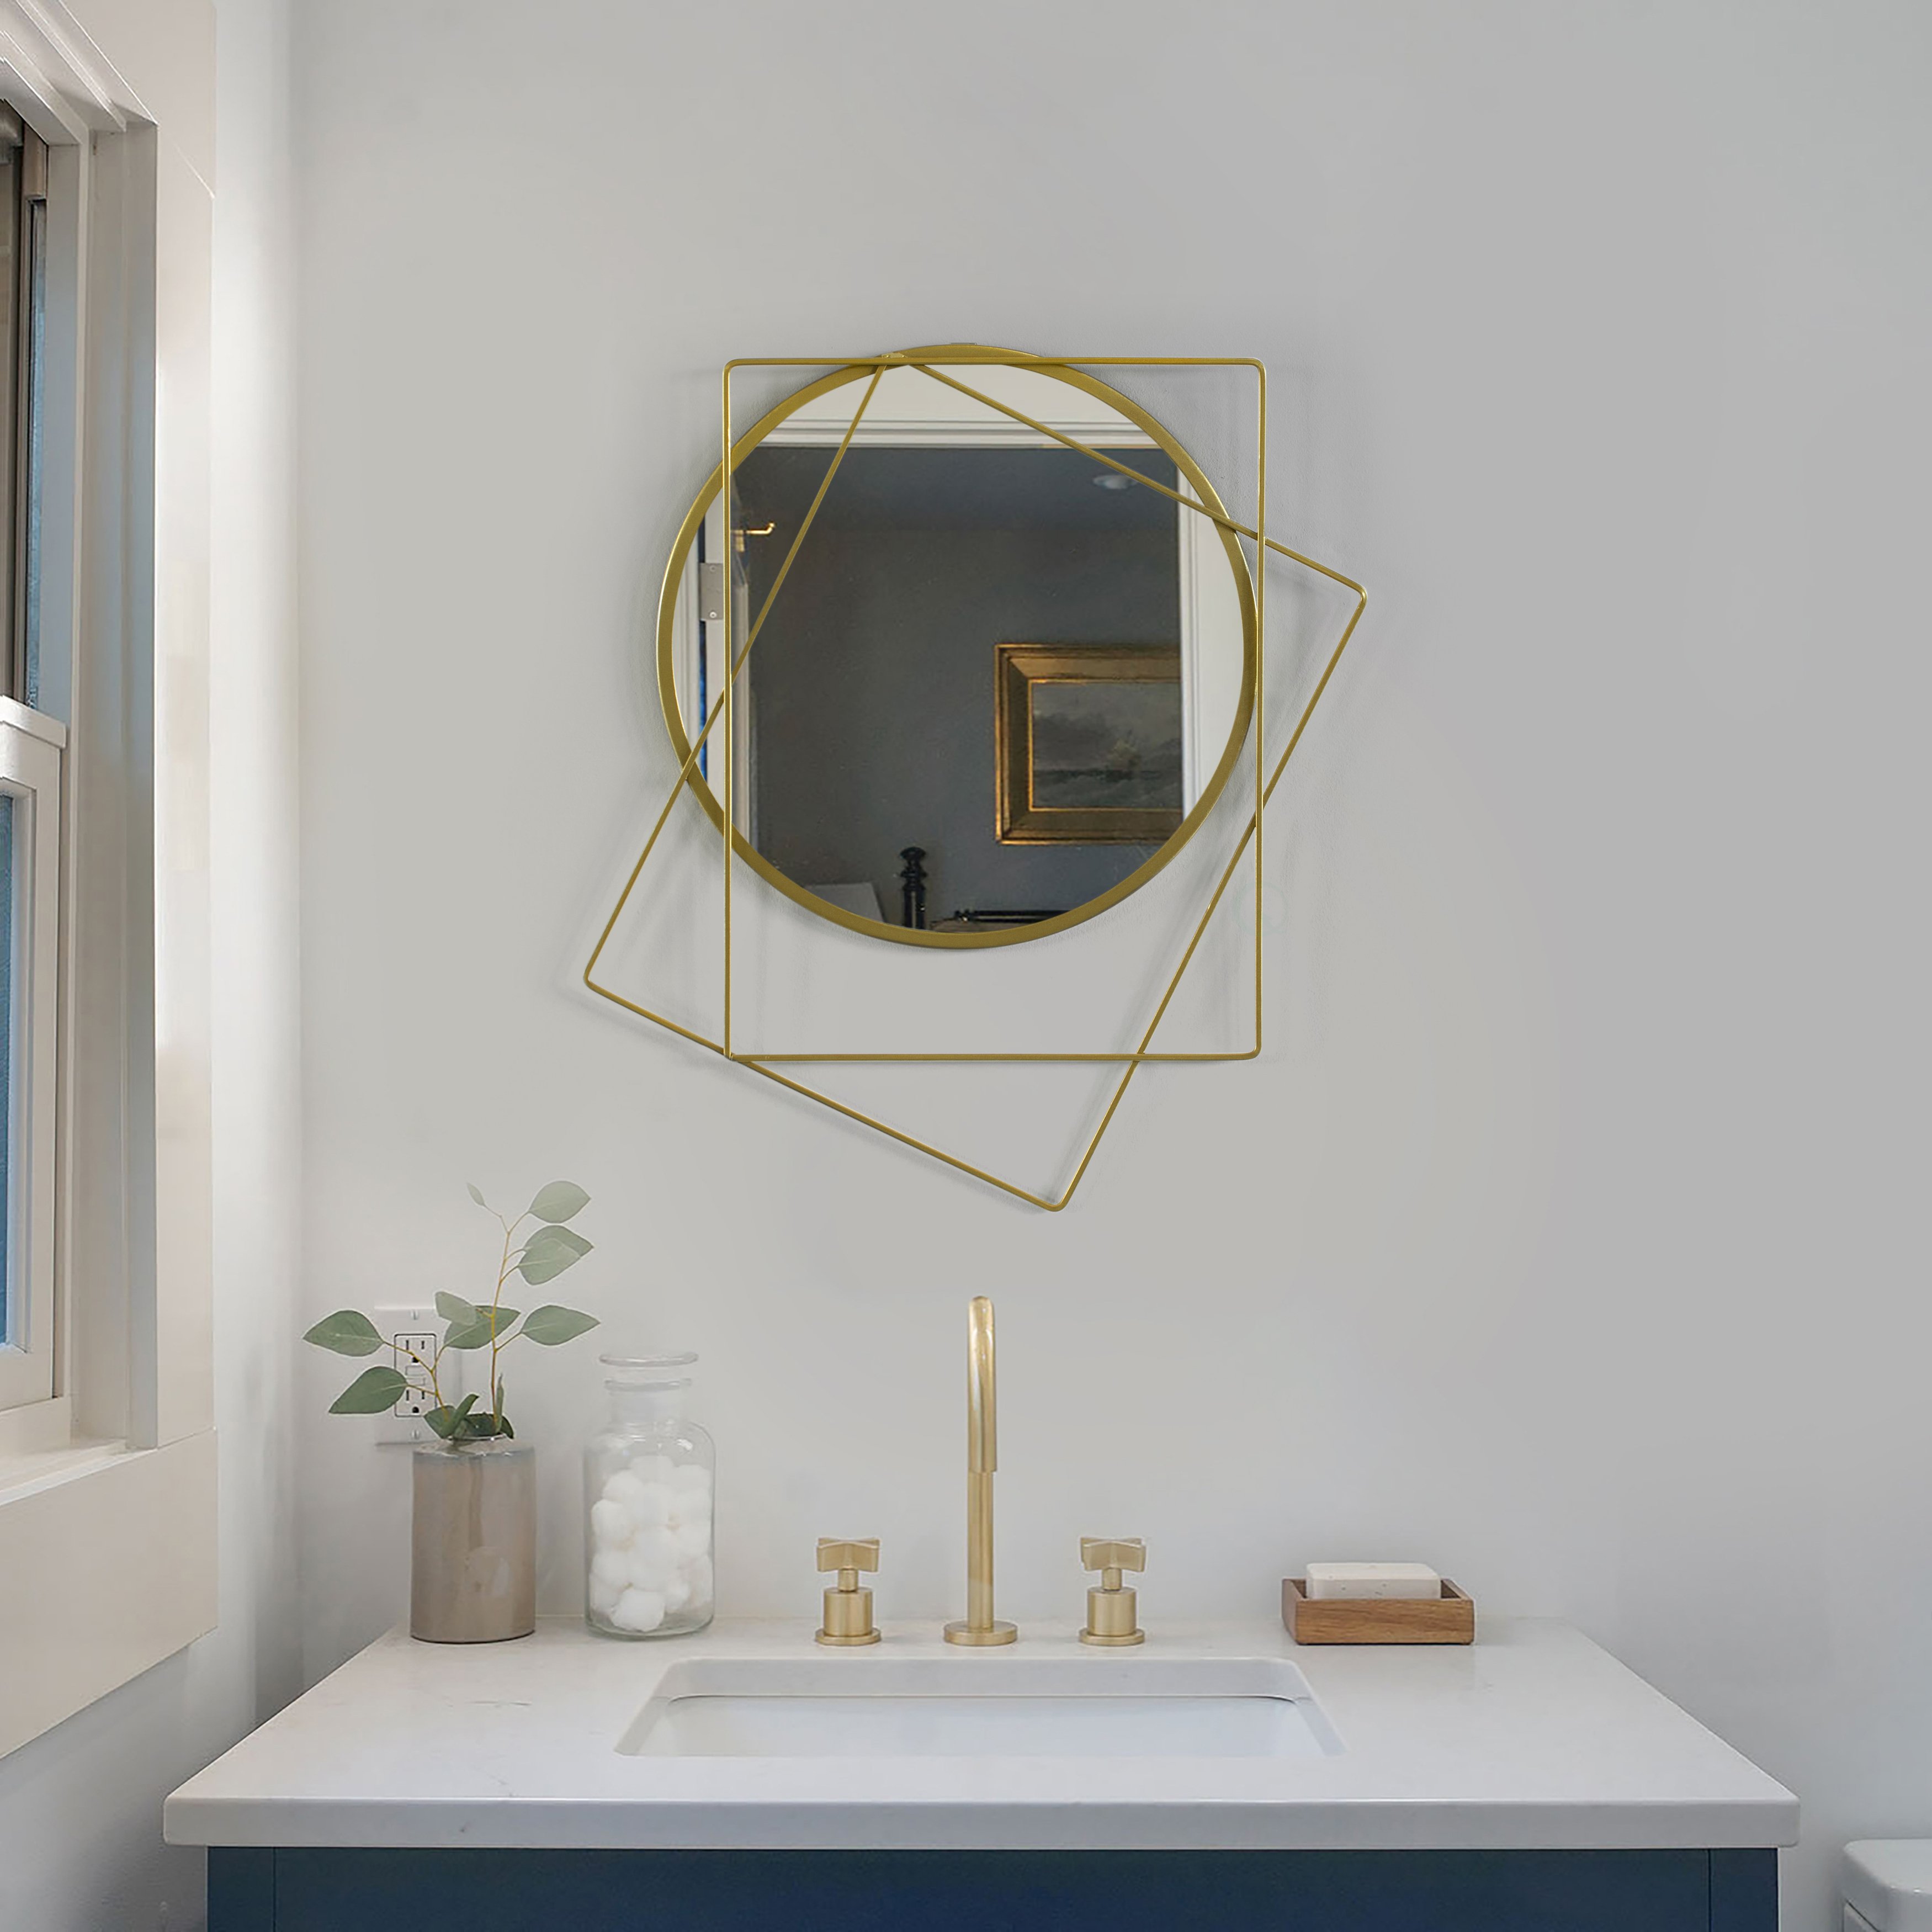 Decorative Round Frame Gold Metal Wall Mounted Modern Mirror With 4 Glass Mirror Balls - Gold Square